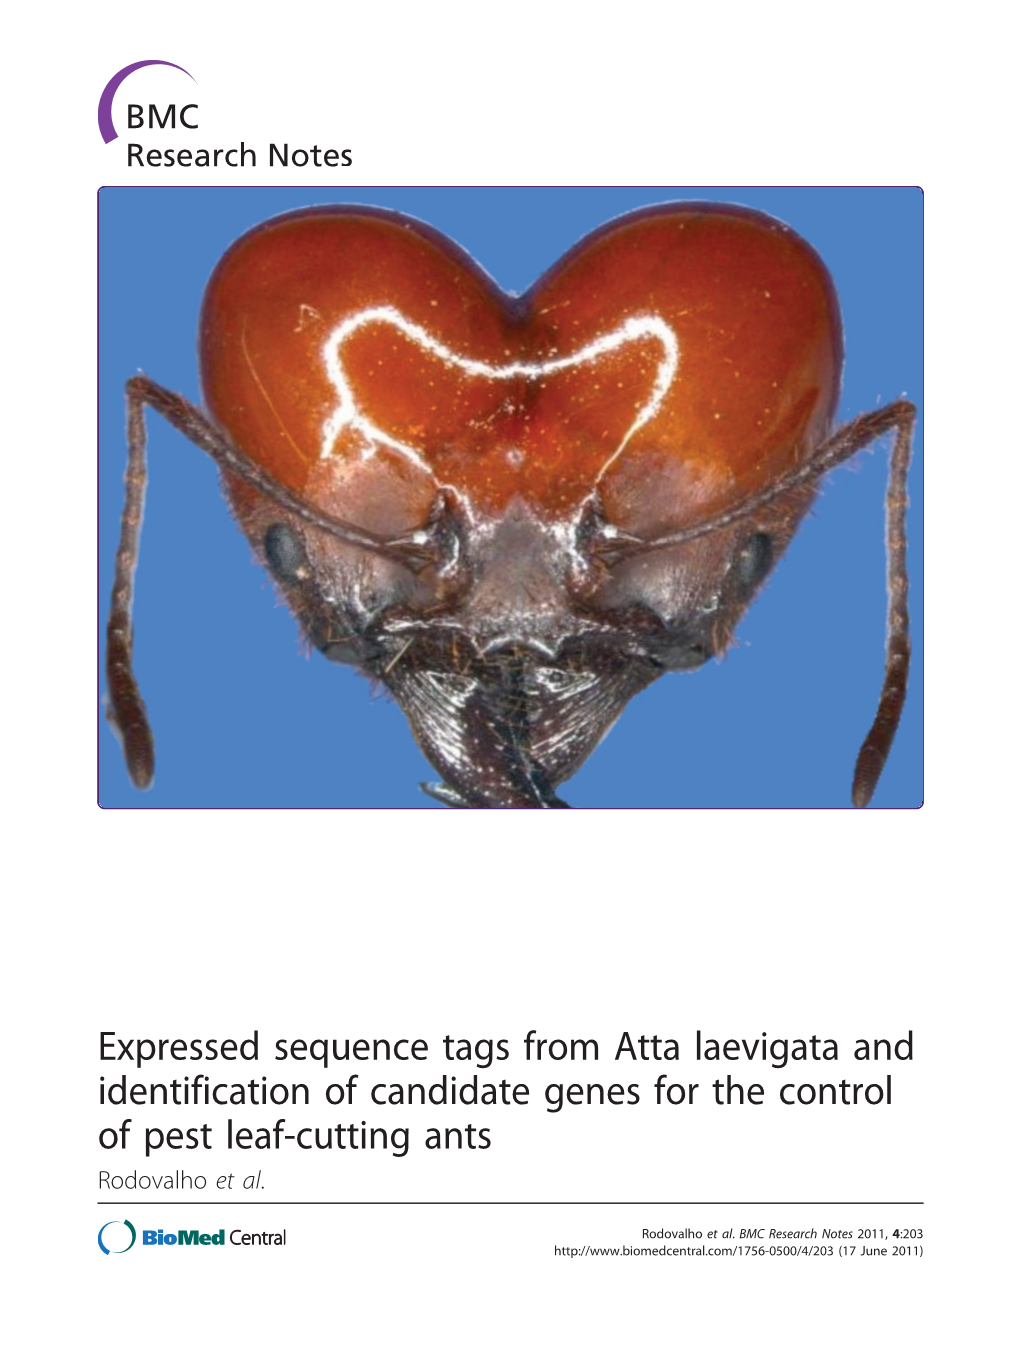 Expressed Sequence Tags from Atta Laevigata and Identification of Candidate Genes for the Control of Pest Leaf-Cutting Ants Rodovalho Et Al